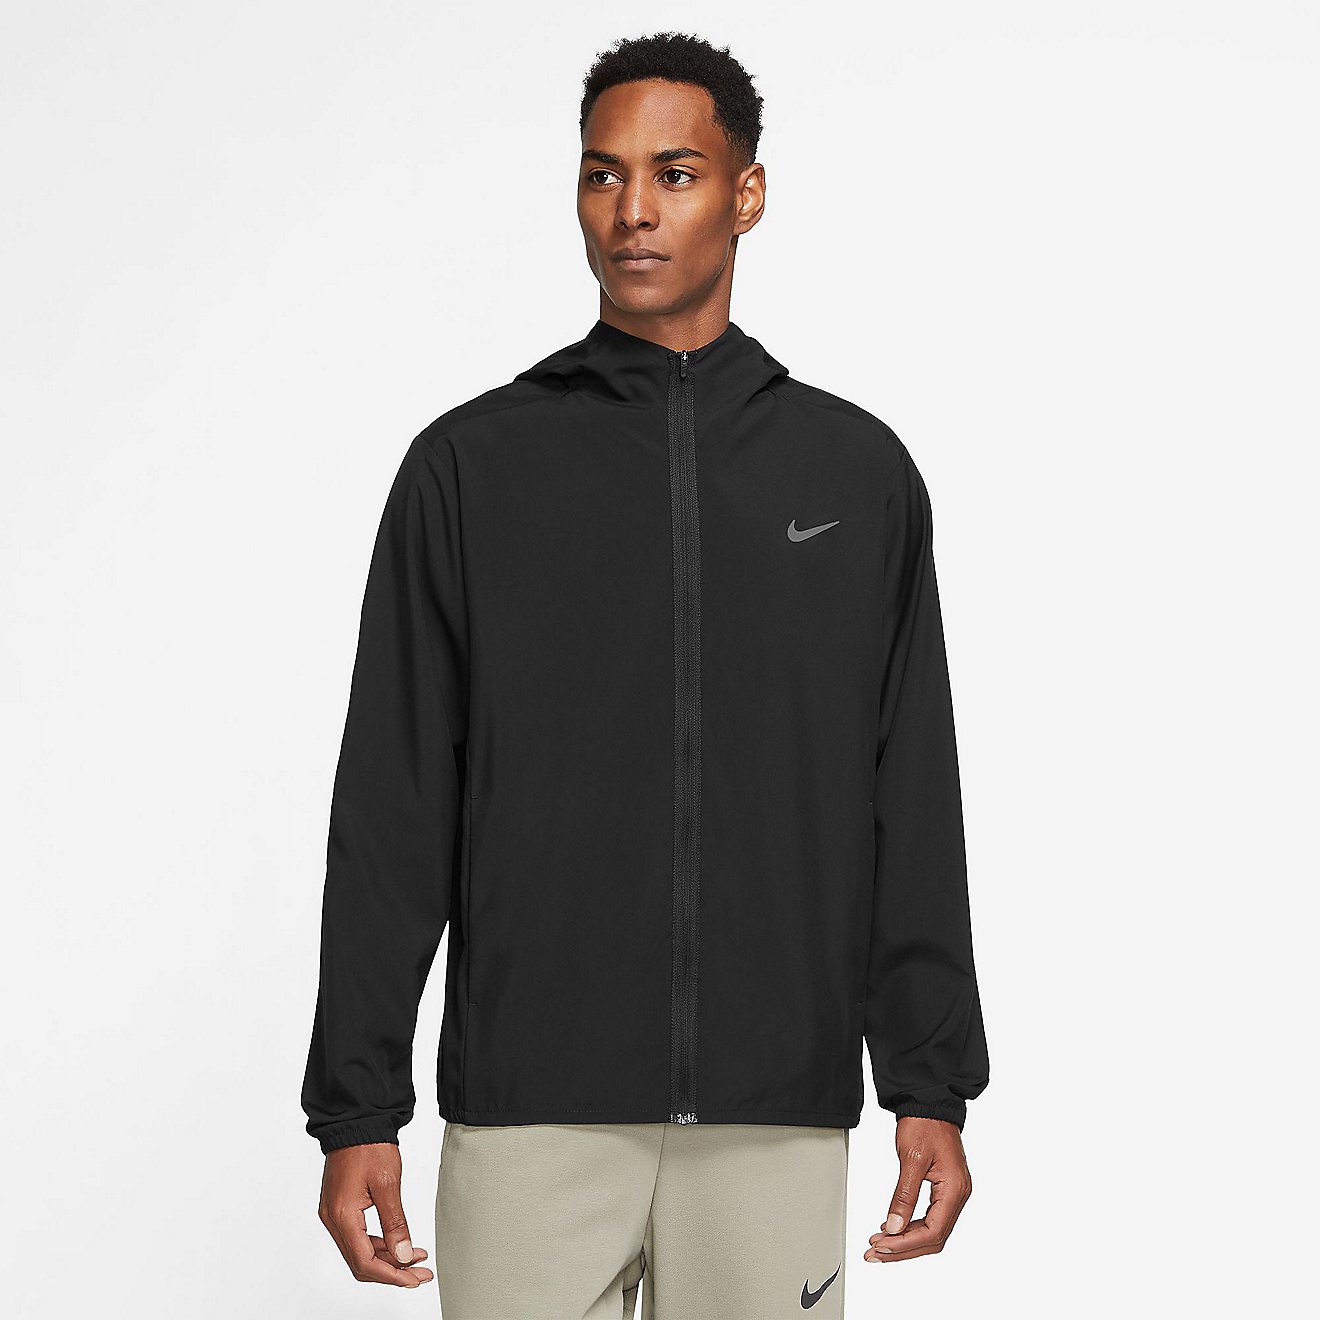 Nike Men's Form Dri-FIT Hooded Jacket | Free Shipping at Academy